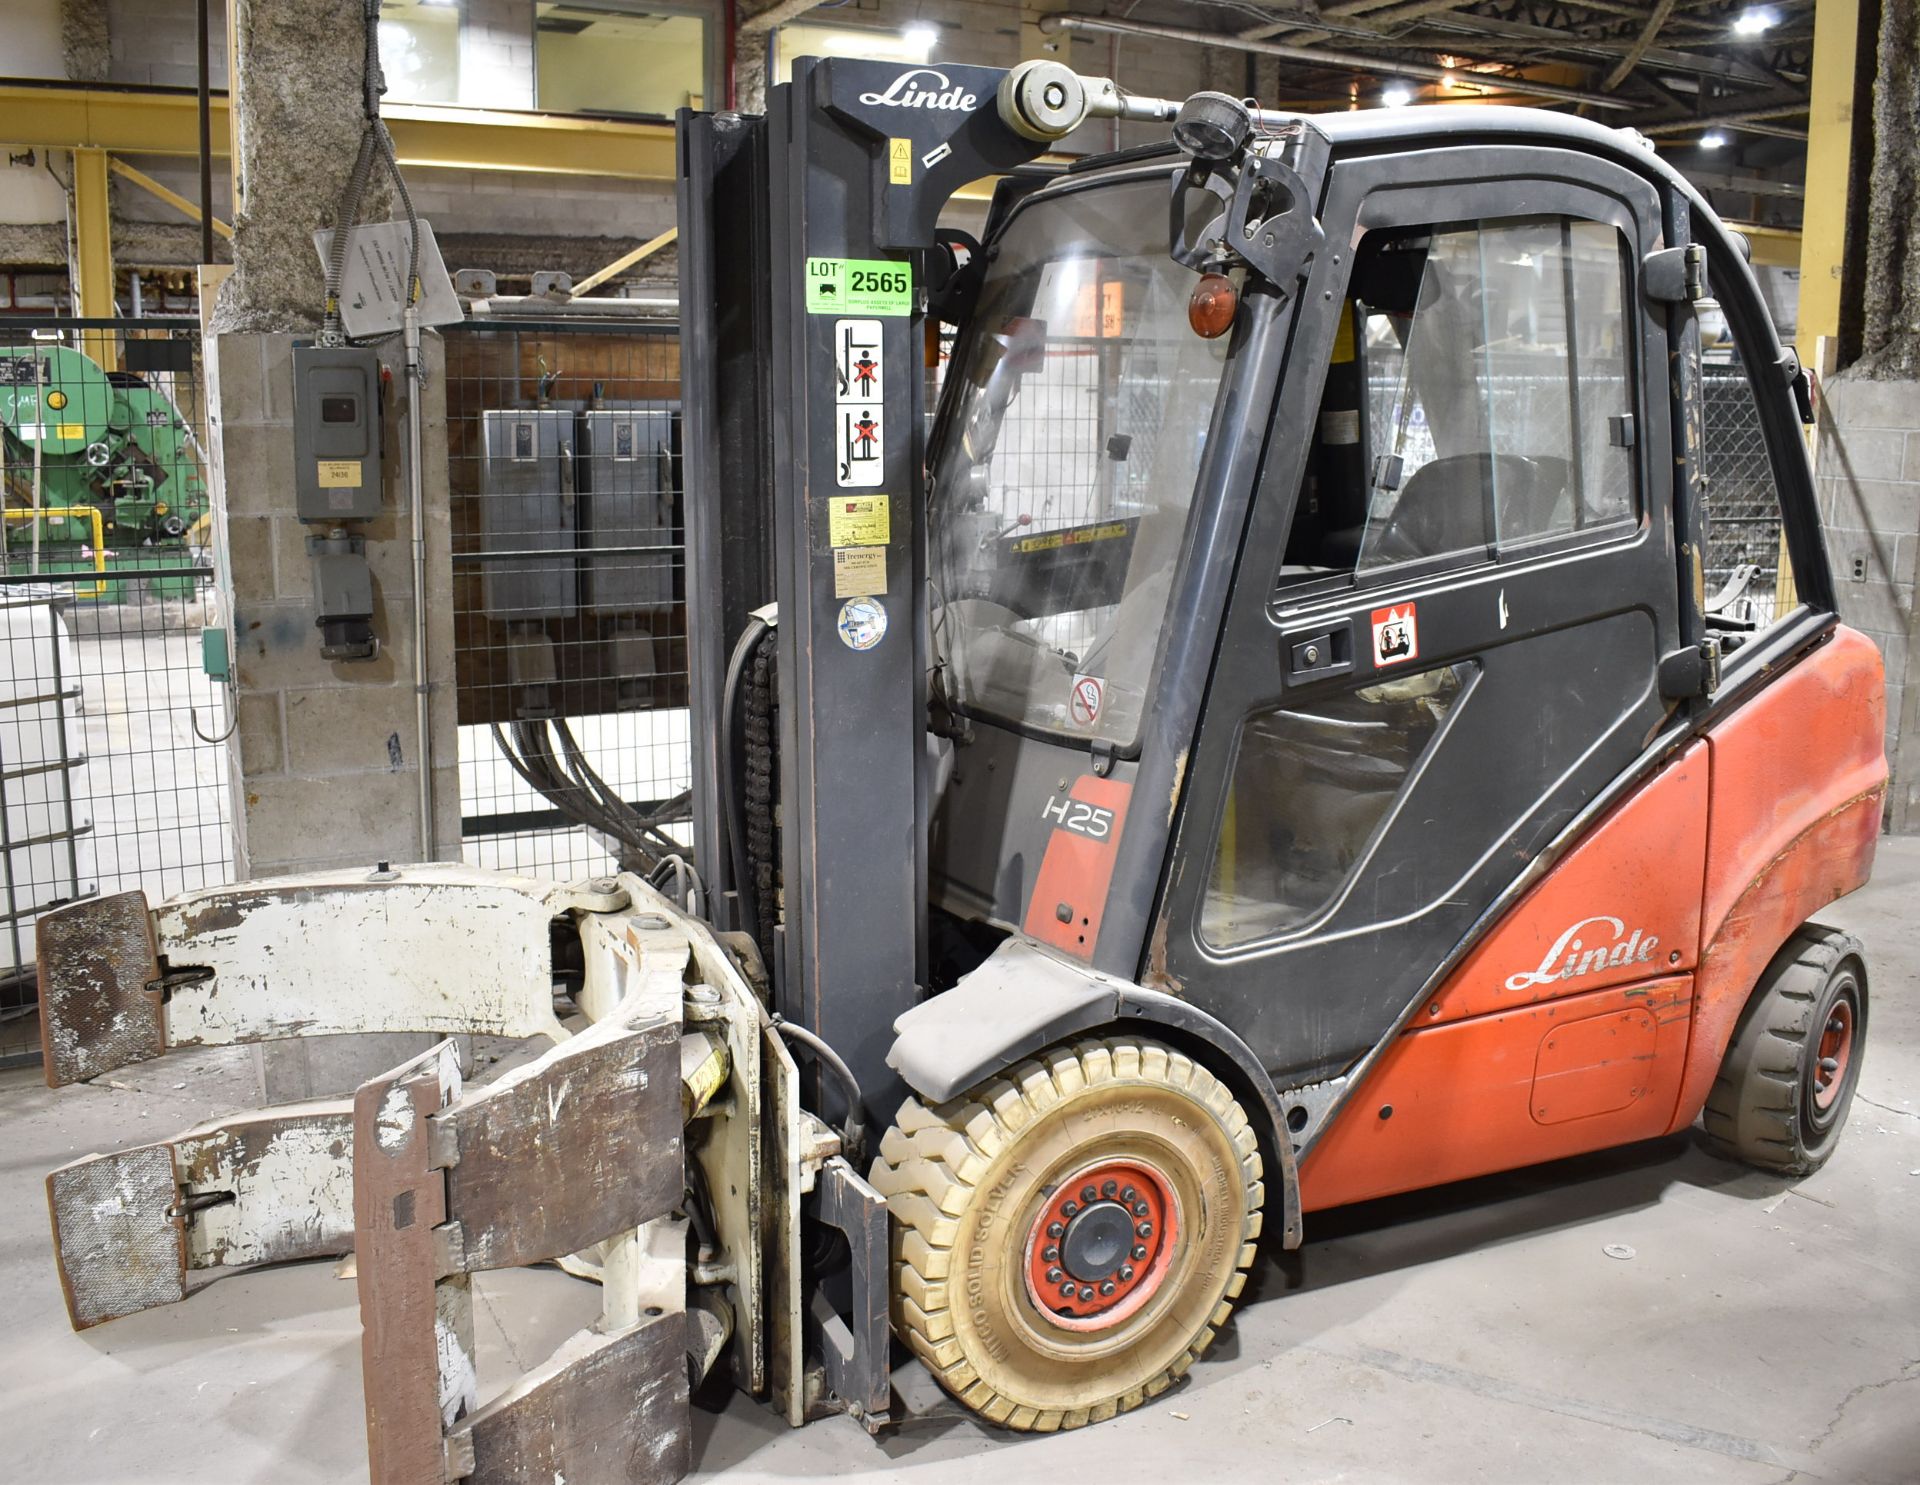 LINDE (2005) H25T 3,410 LB. CAPACITY LPG FORKLIFT WITH 183.5" MAX. LIFT HEIGHT, 2-STAGE MAST, - Image 3 of 17